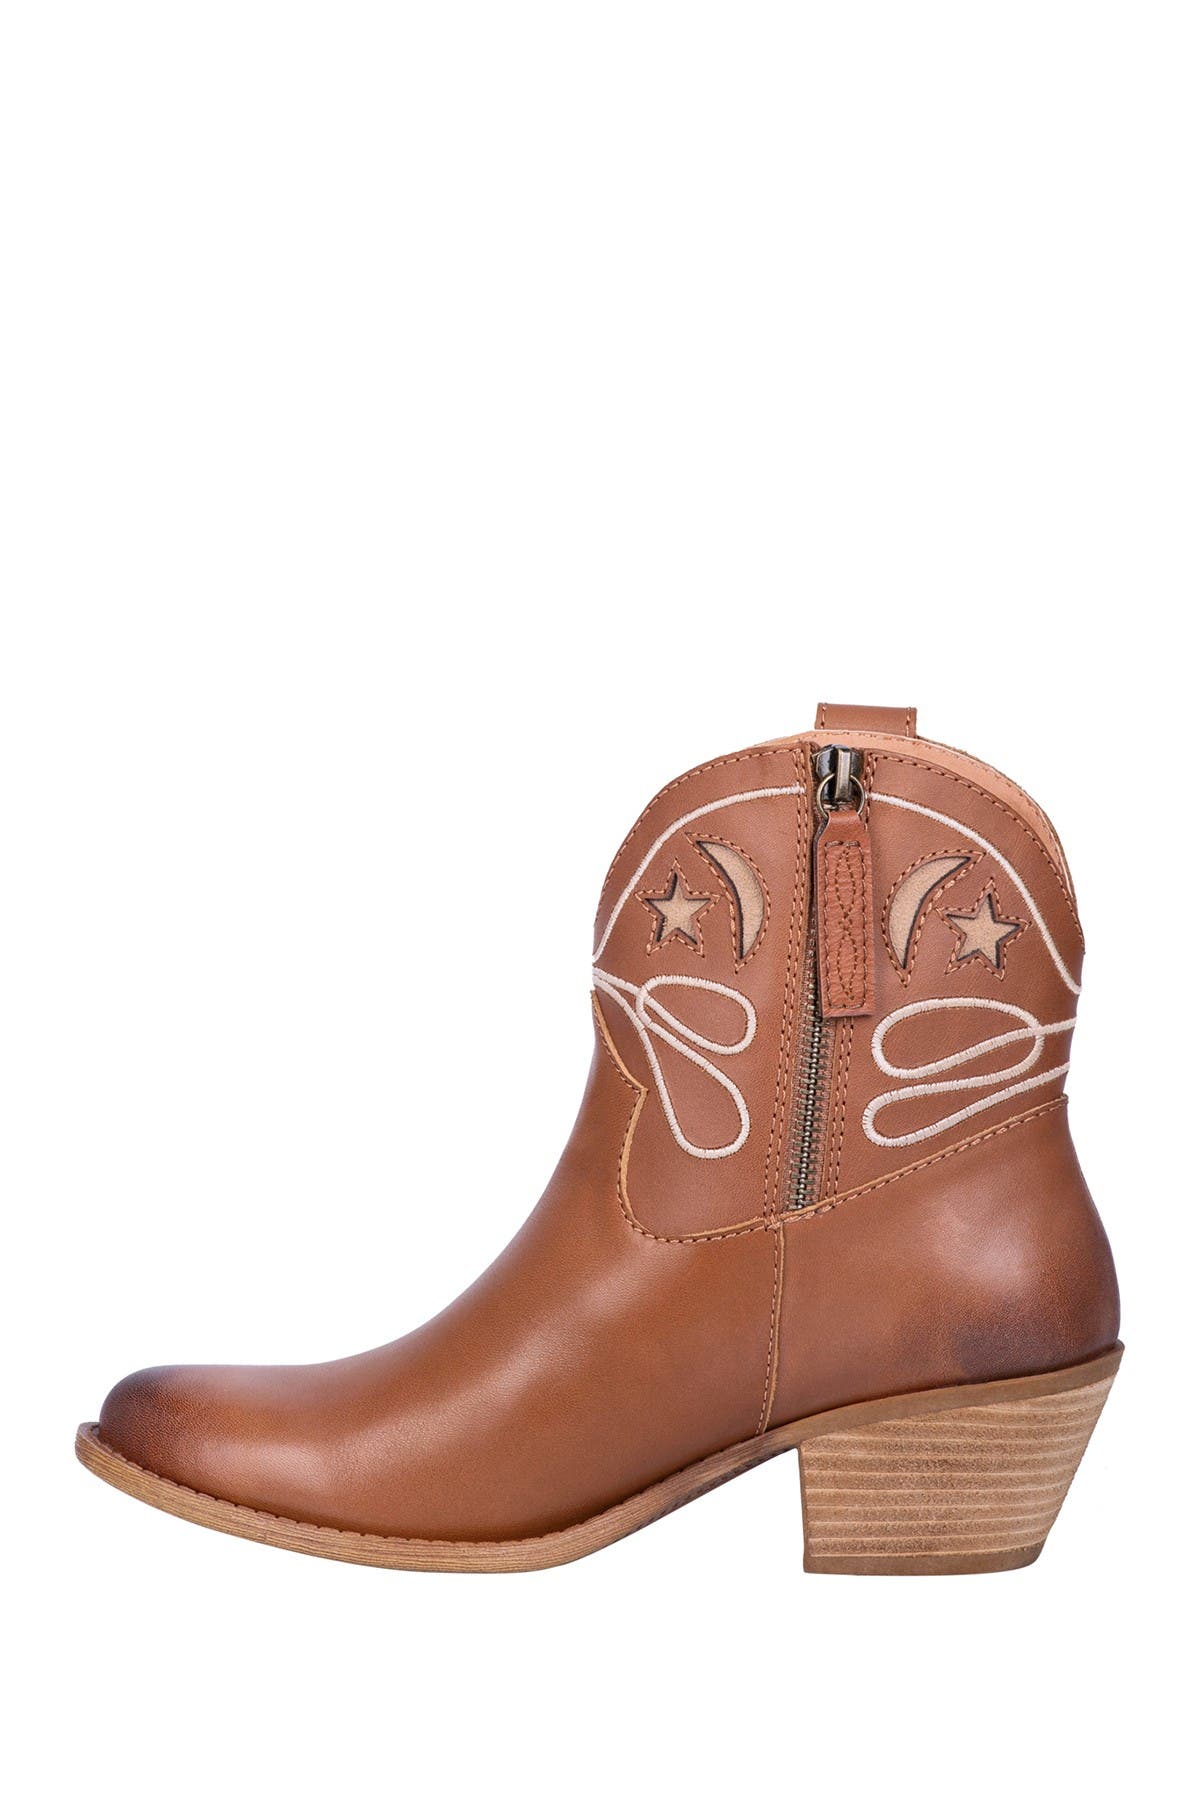 Dingo Urban Cowboy Leather Western Boot In Brown